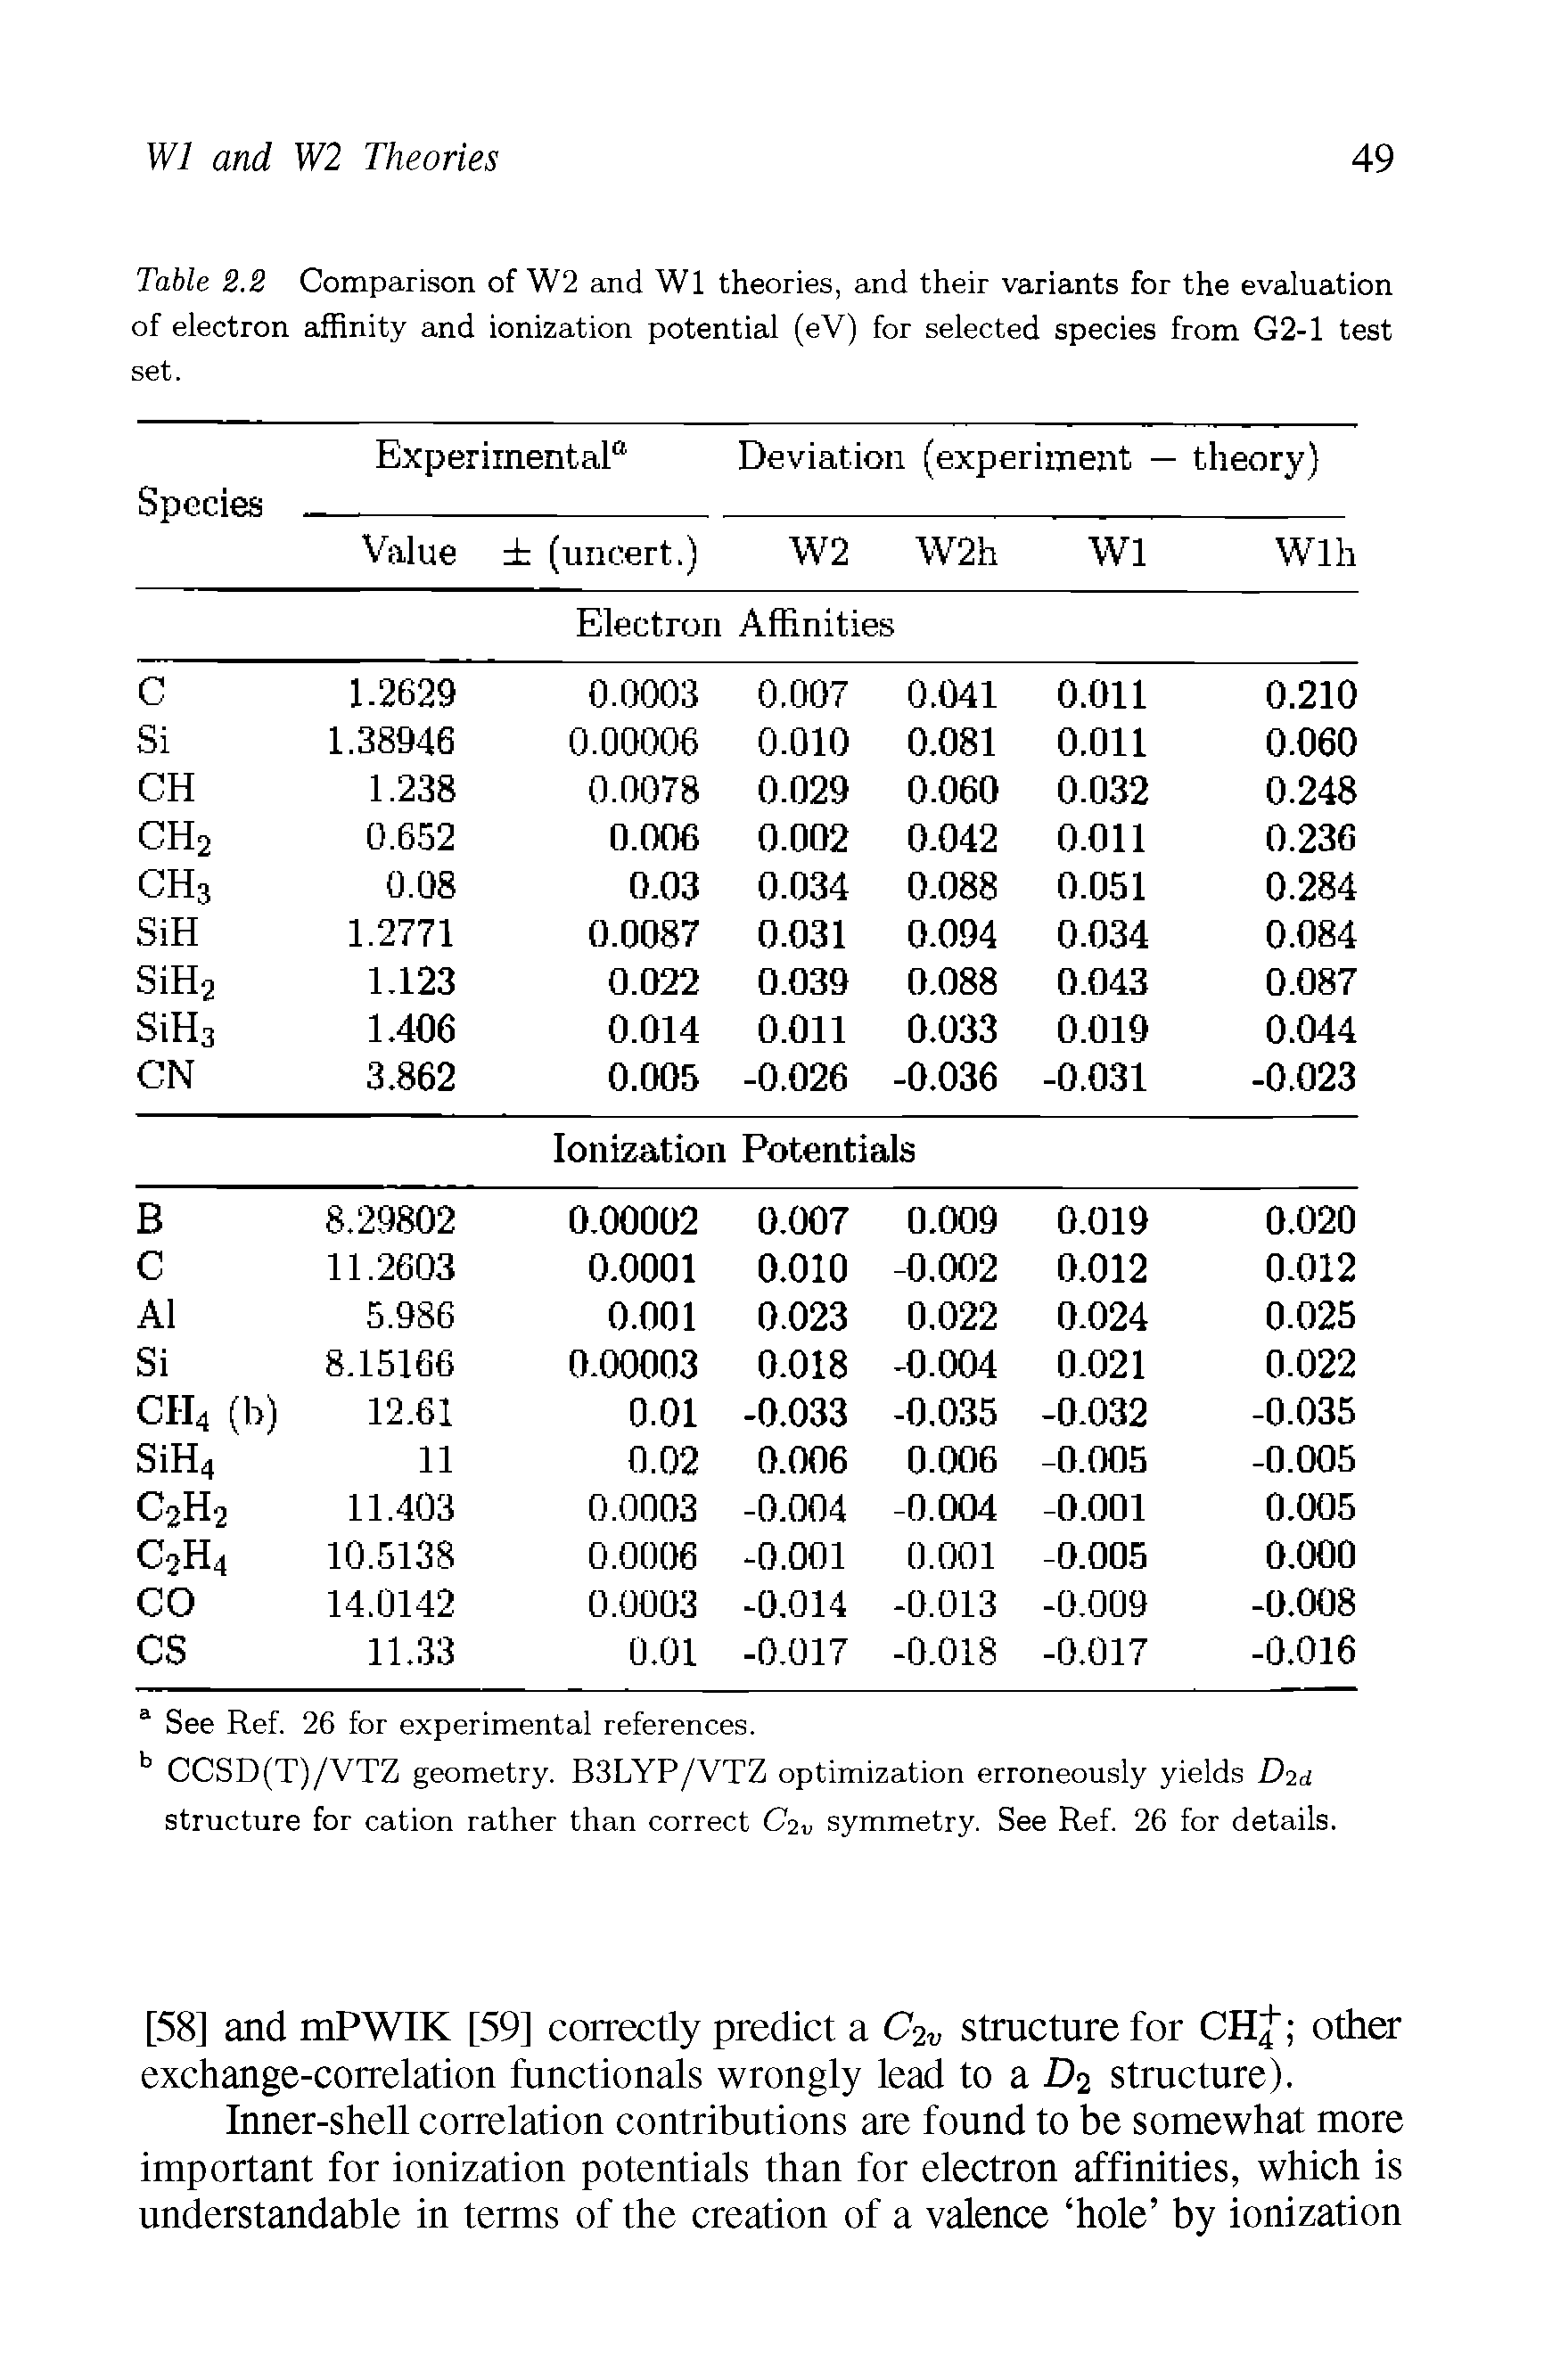 Table 2.2 Comparison of W2 and W1 theories, and their variants for the evaluation of electron affinity and ionization potential (eV) for selected species from G2-1 test set.